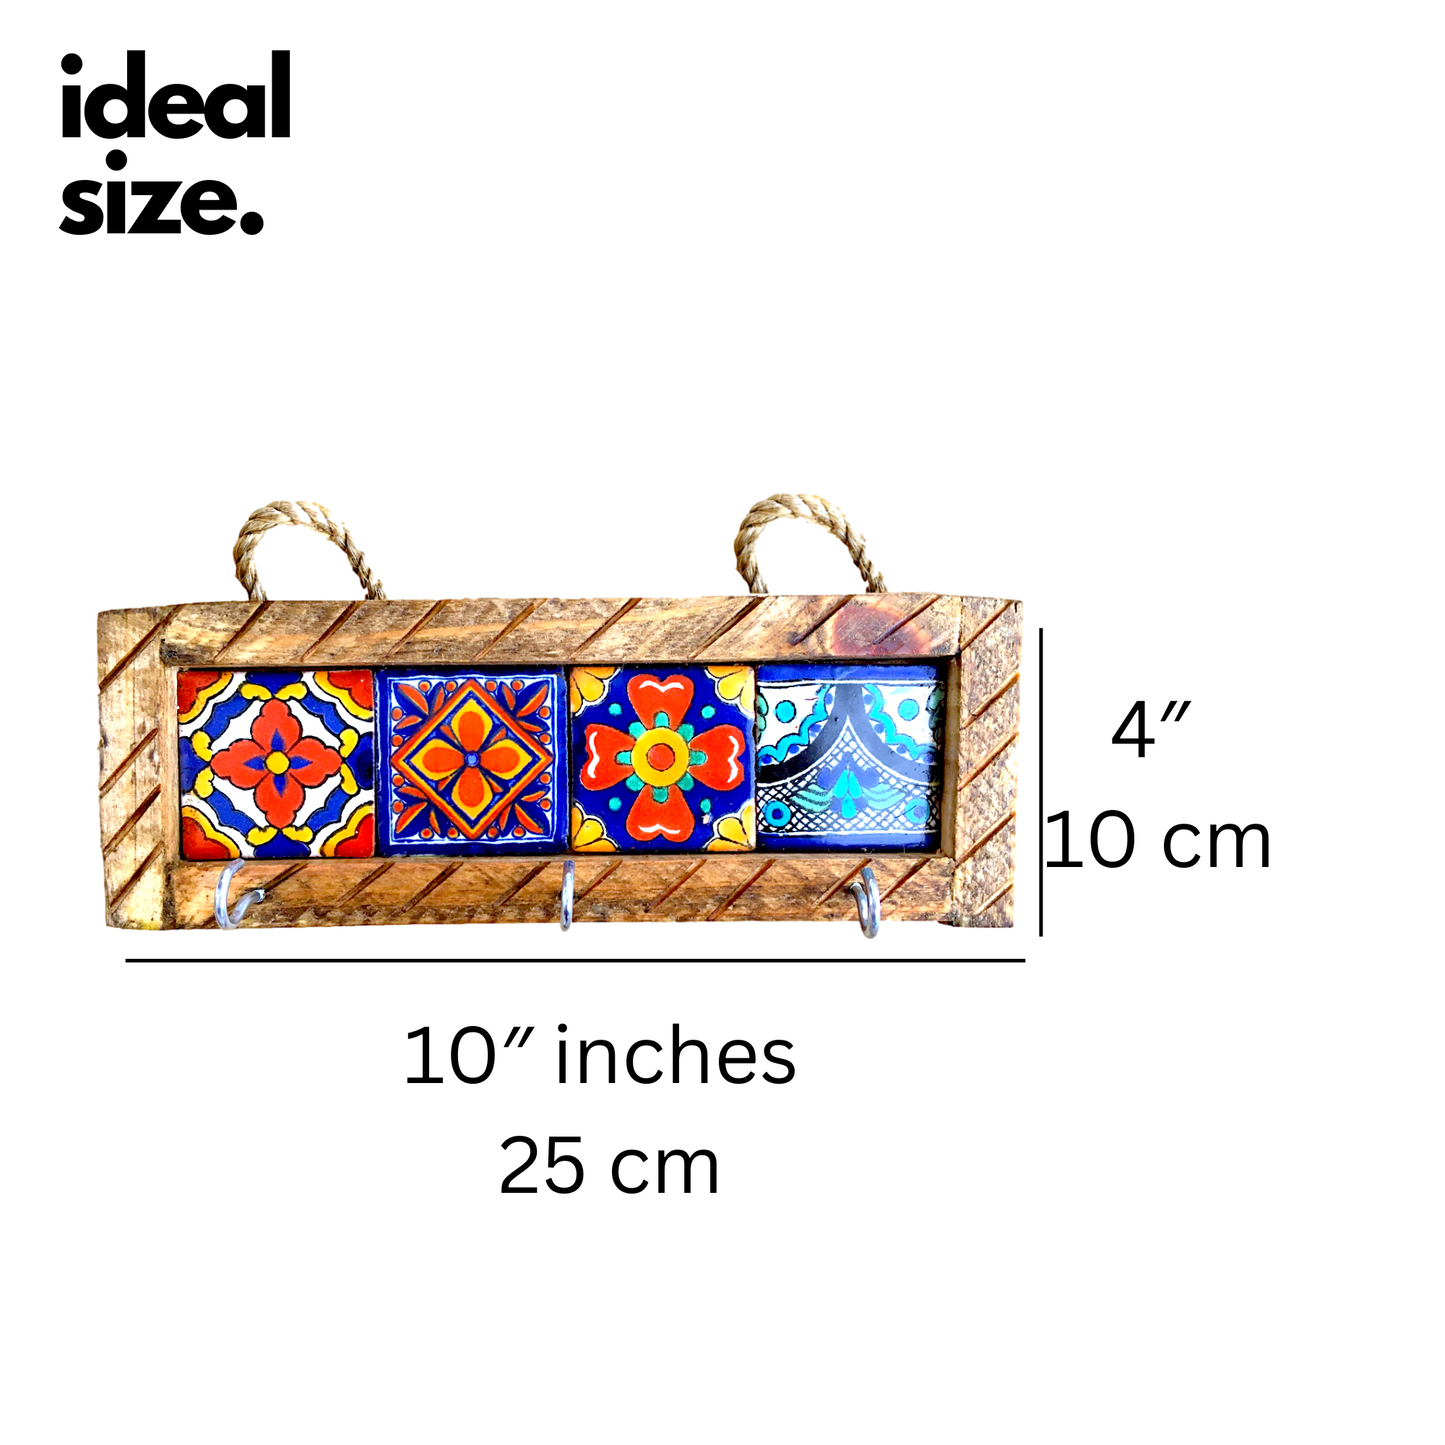 size of Handmade Mexican Talavera Tiles Key Holder, perfect for key organization and for adding vibrant Mexican style to your home.